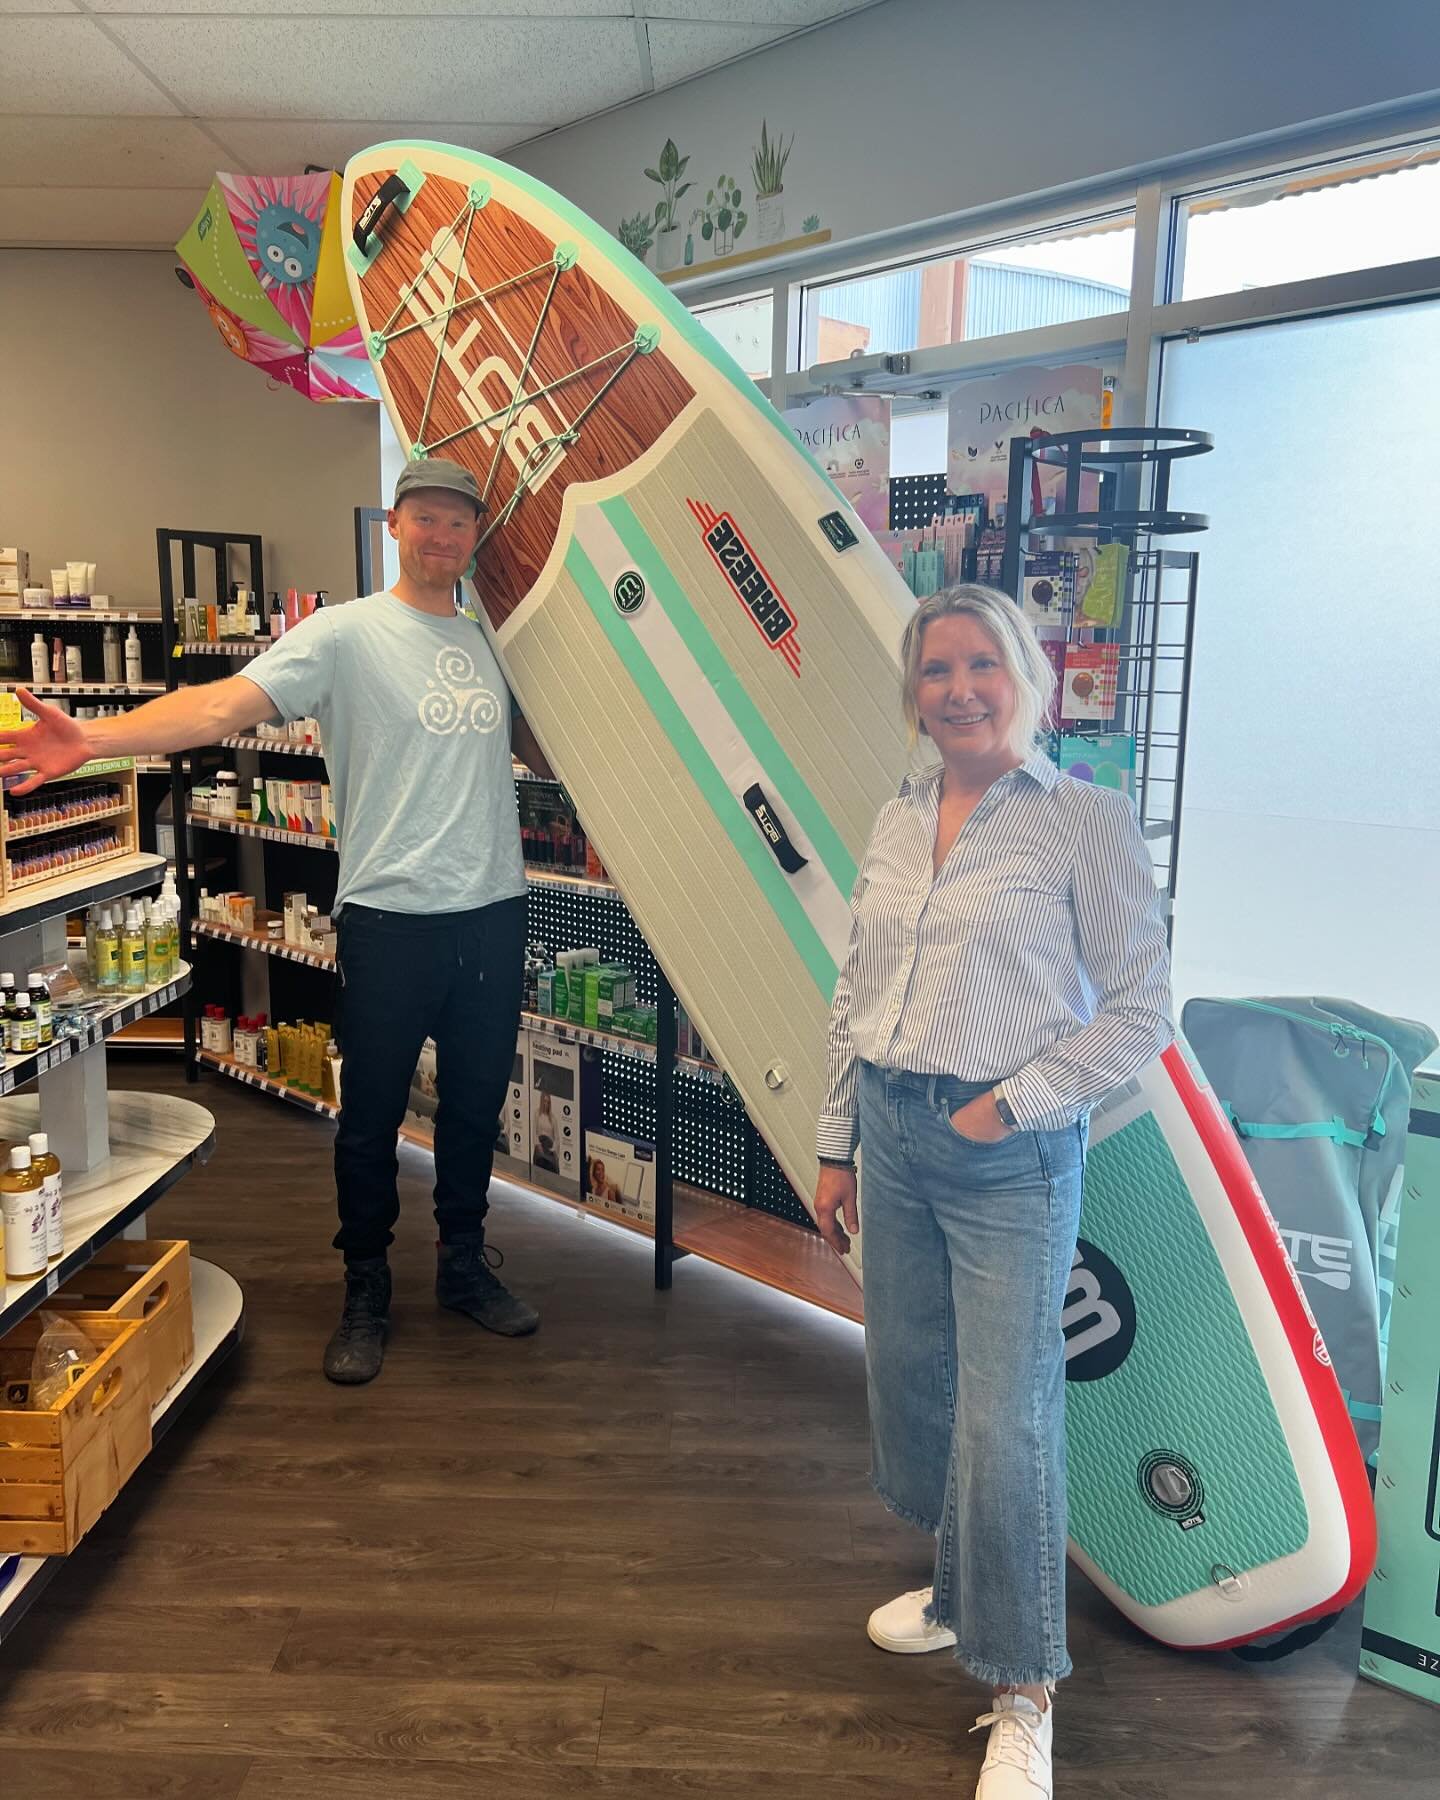 Congratulations to the winner of our @puricawellness paddle board draw! We hope you have so much fun Tammy ☺️ Thank you to all who entered and support our small business! Stay tuned for more contests!